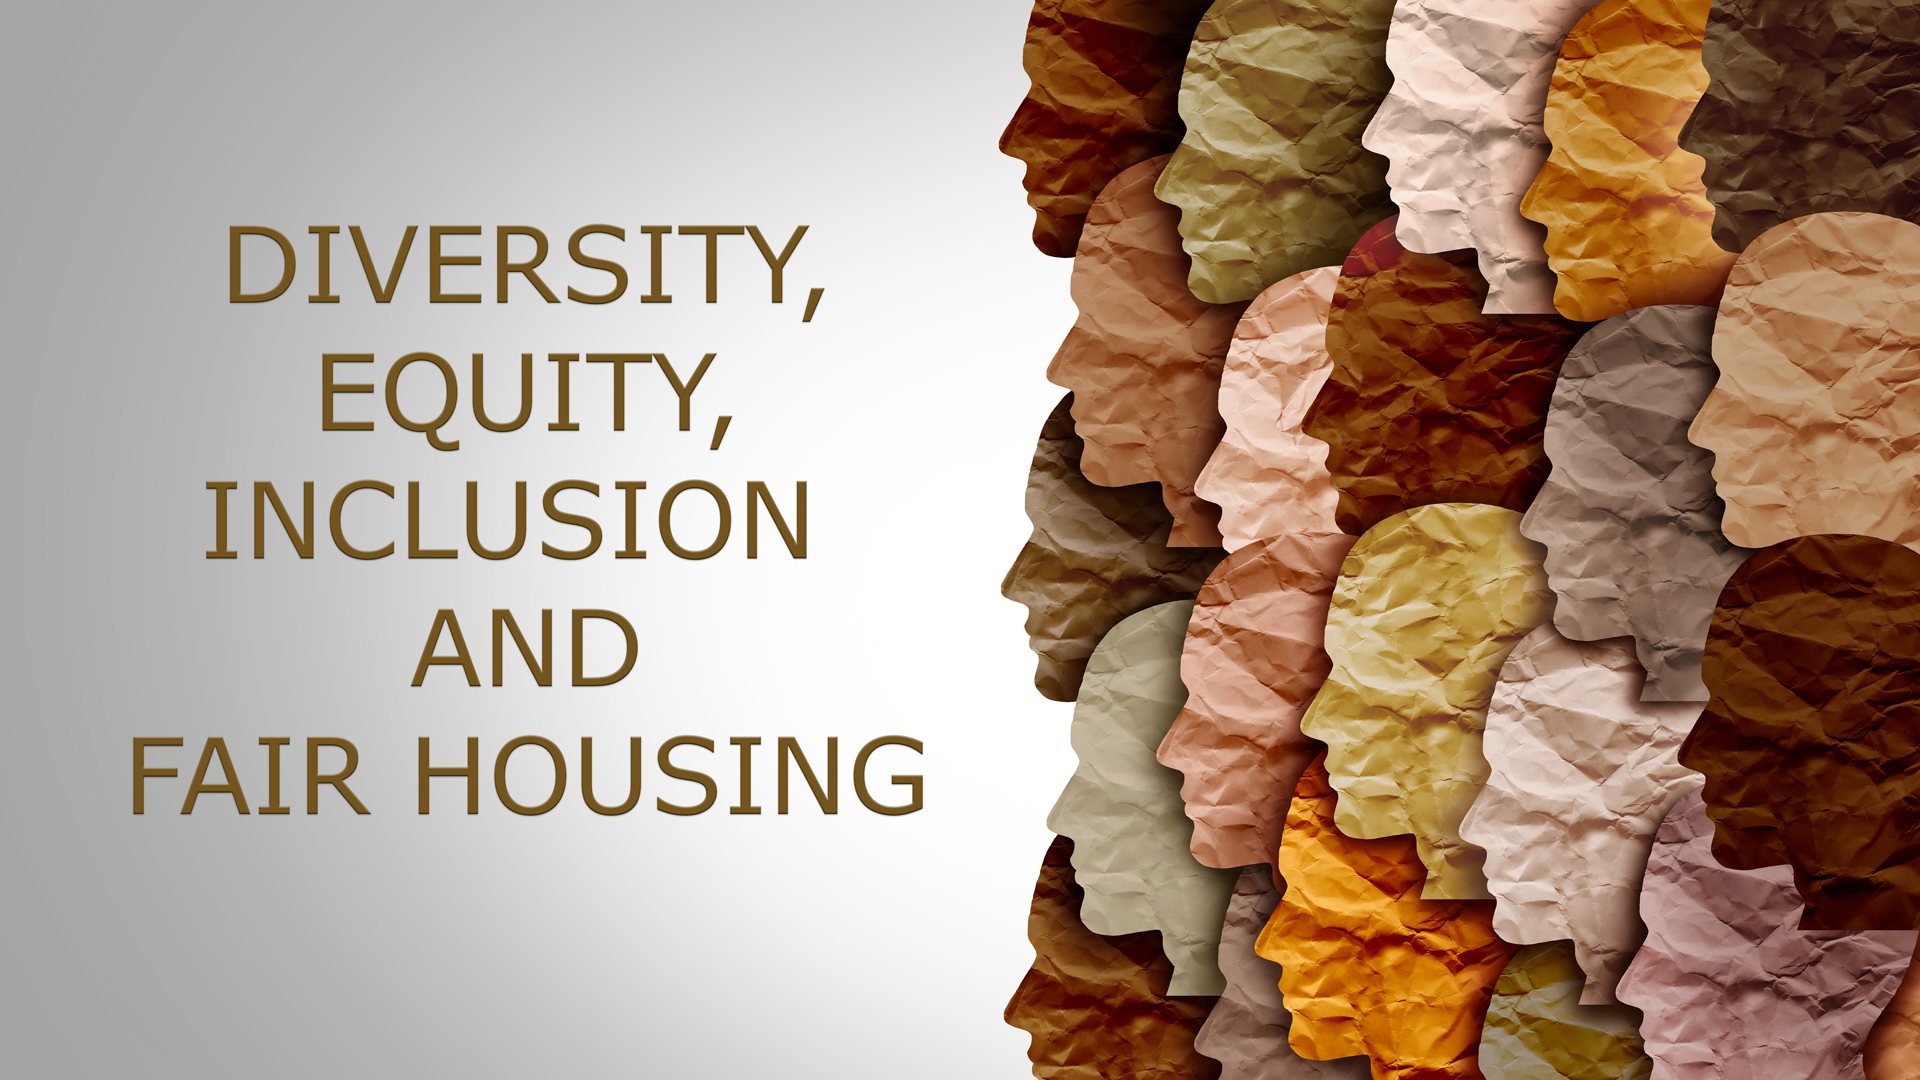 Diversity, Equity, Inclusion and Fair Housing